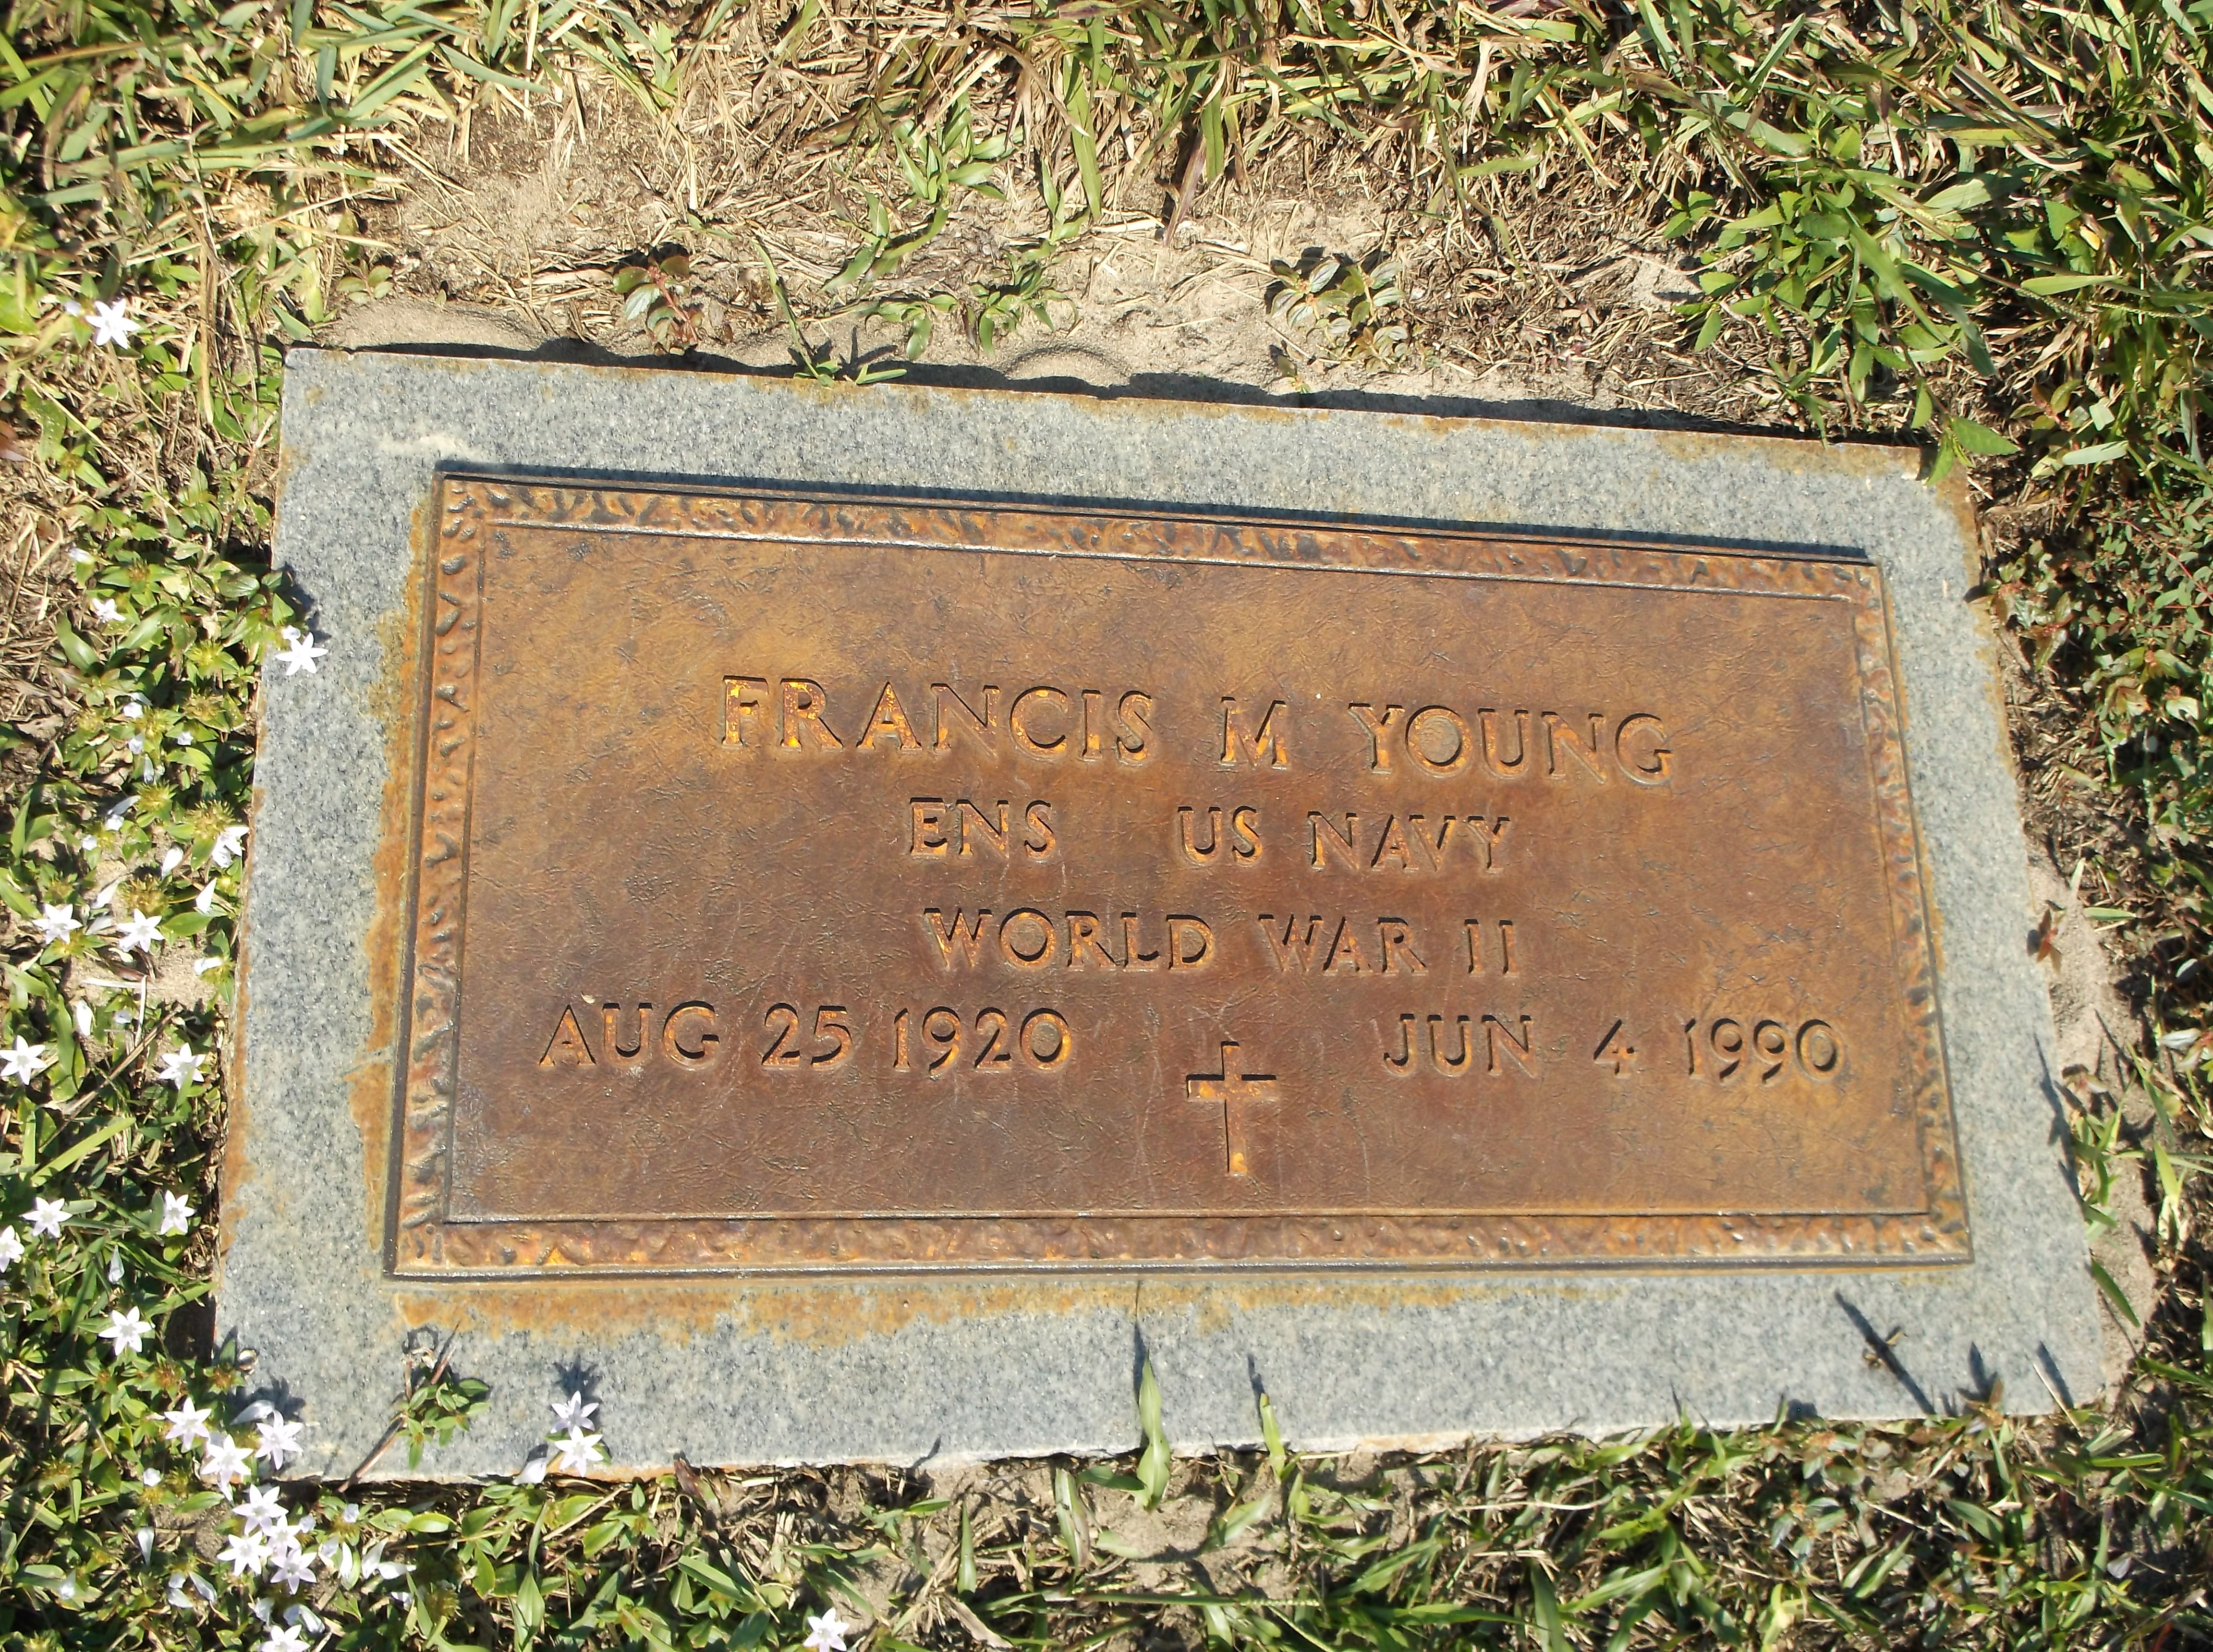 Francis M Young